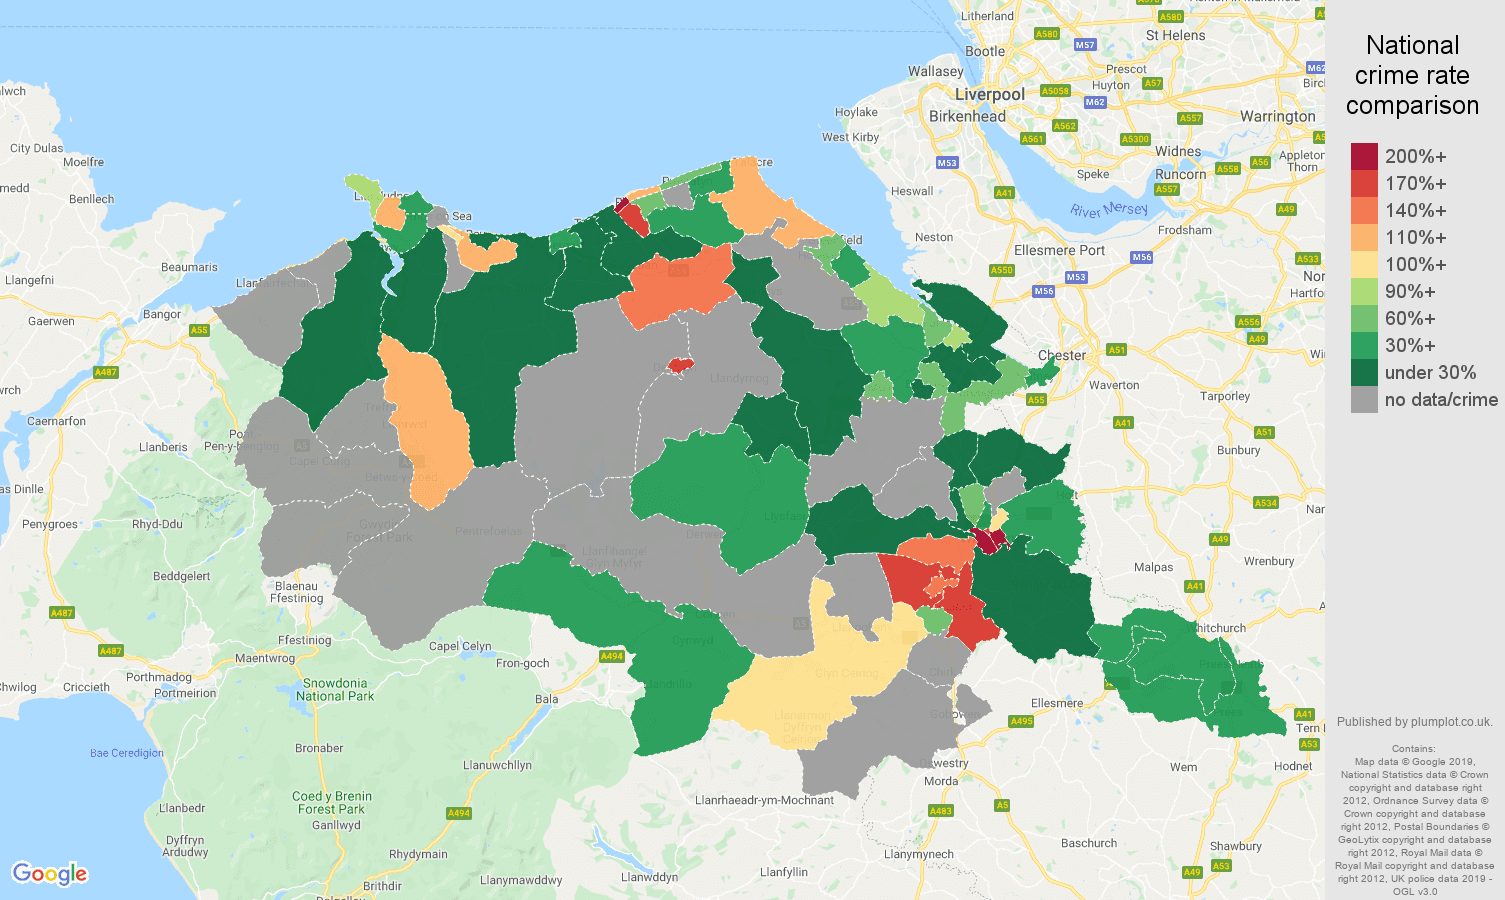 Clwyd possession of weapons crime rate comparison map